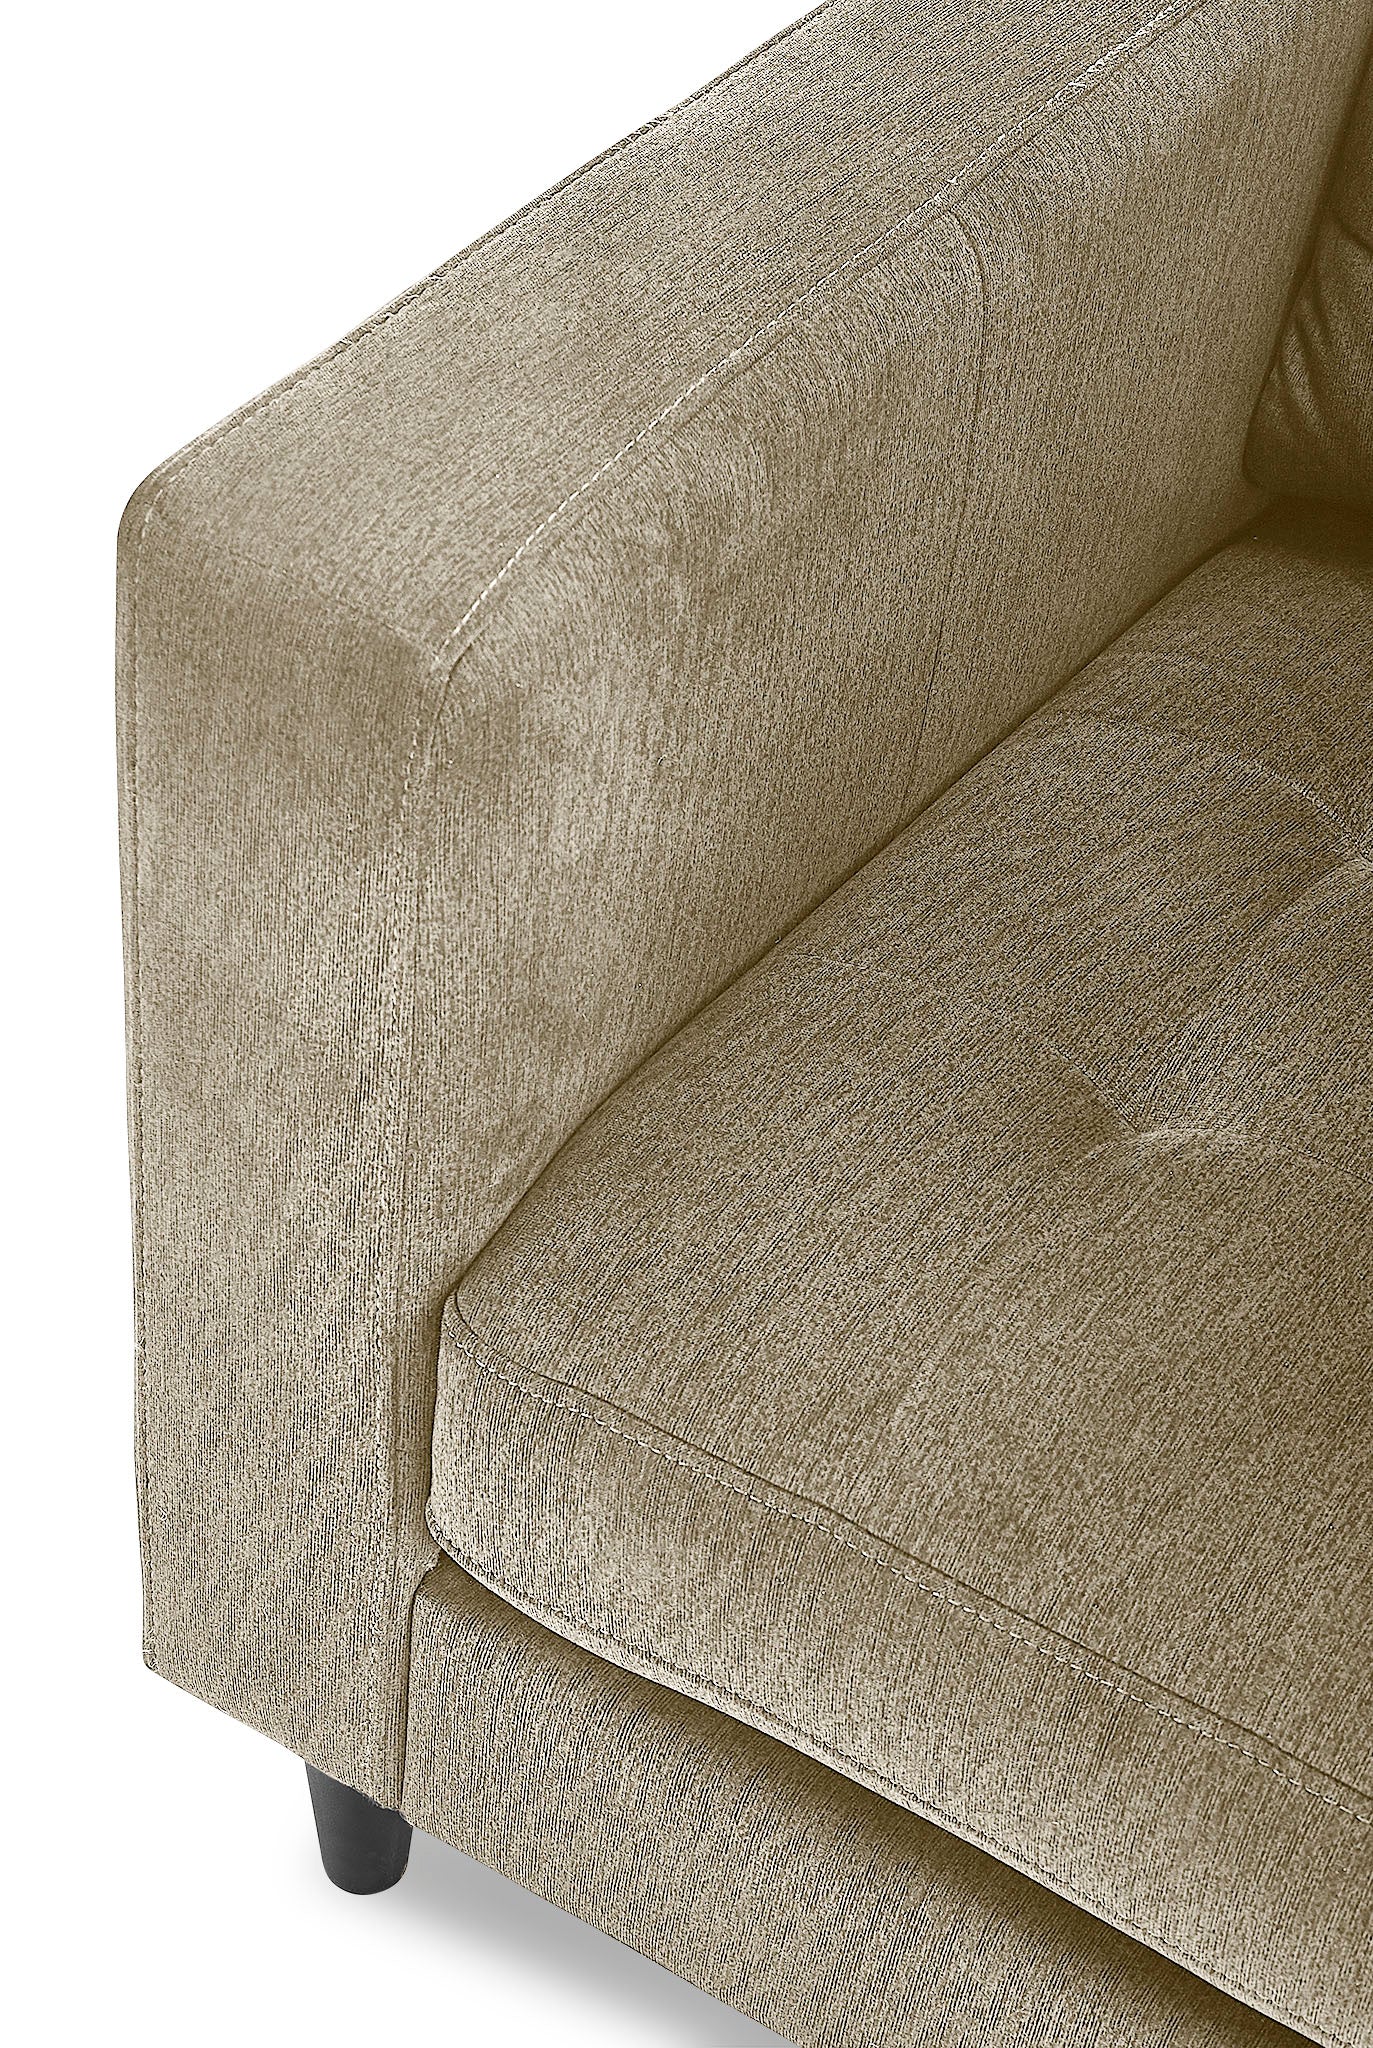 Anthena Sofa and Chair Set - Taupe